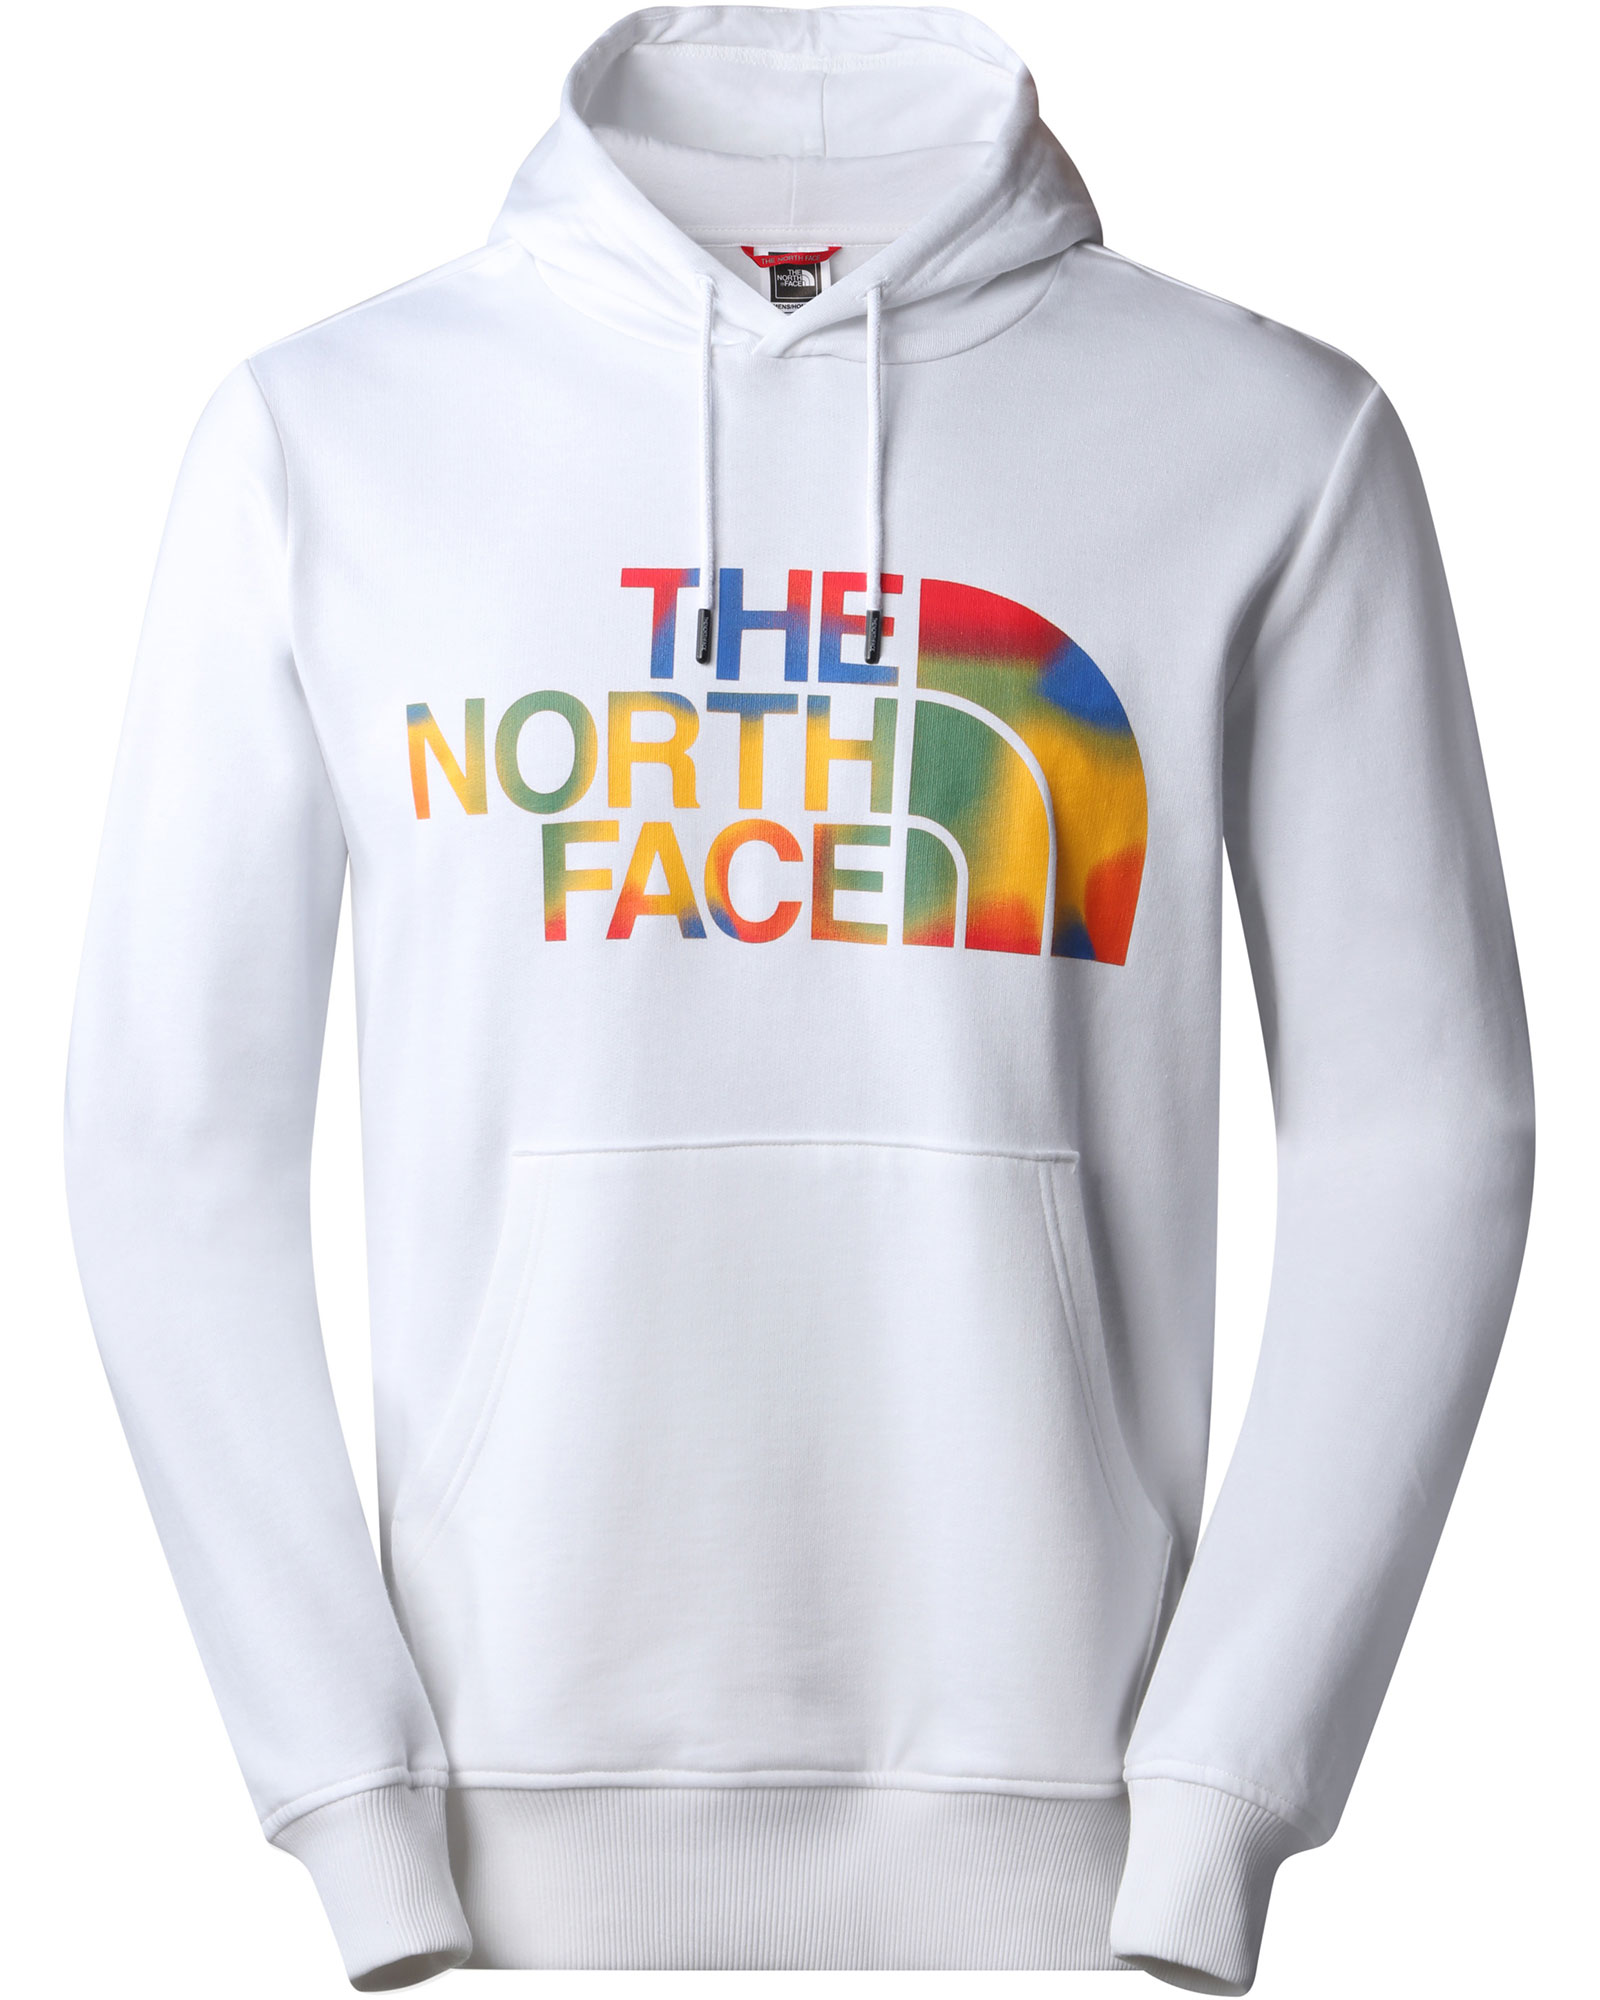 The North Face Men’s Standard Hoodie - TNF White/Super Sonic Print S